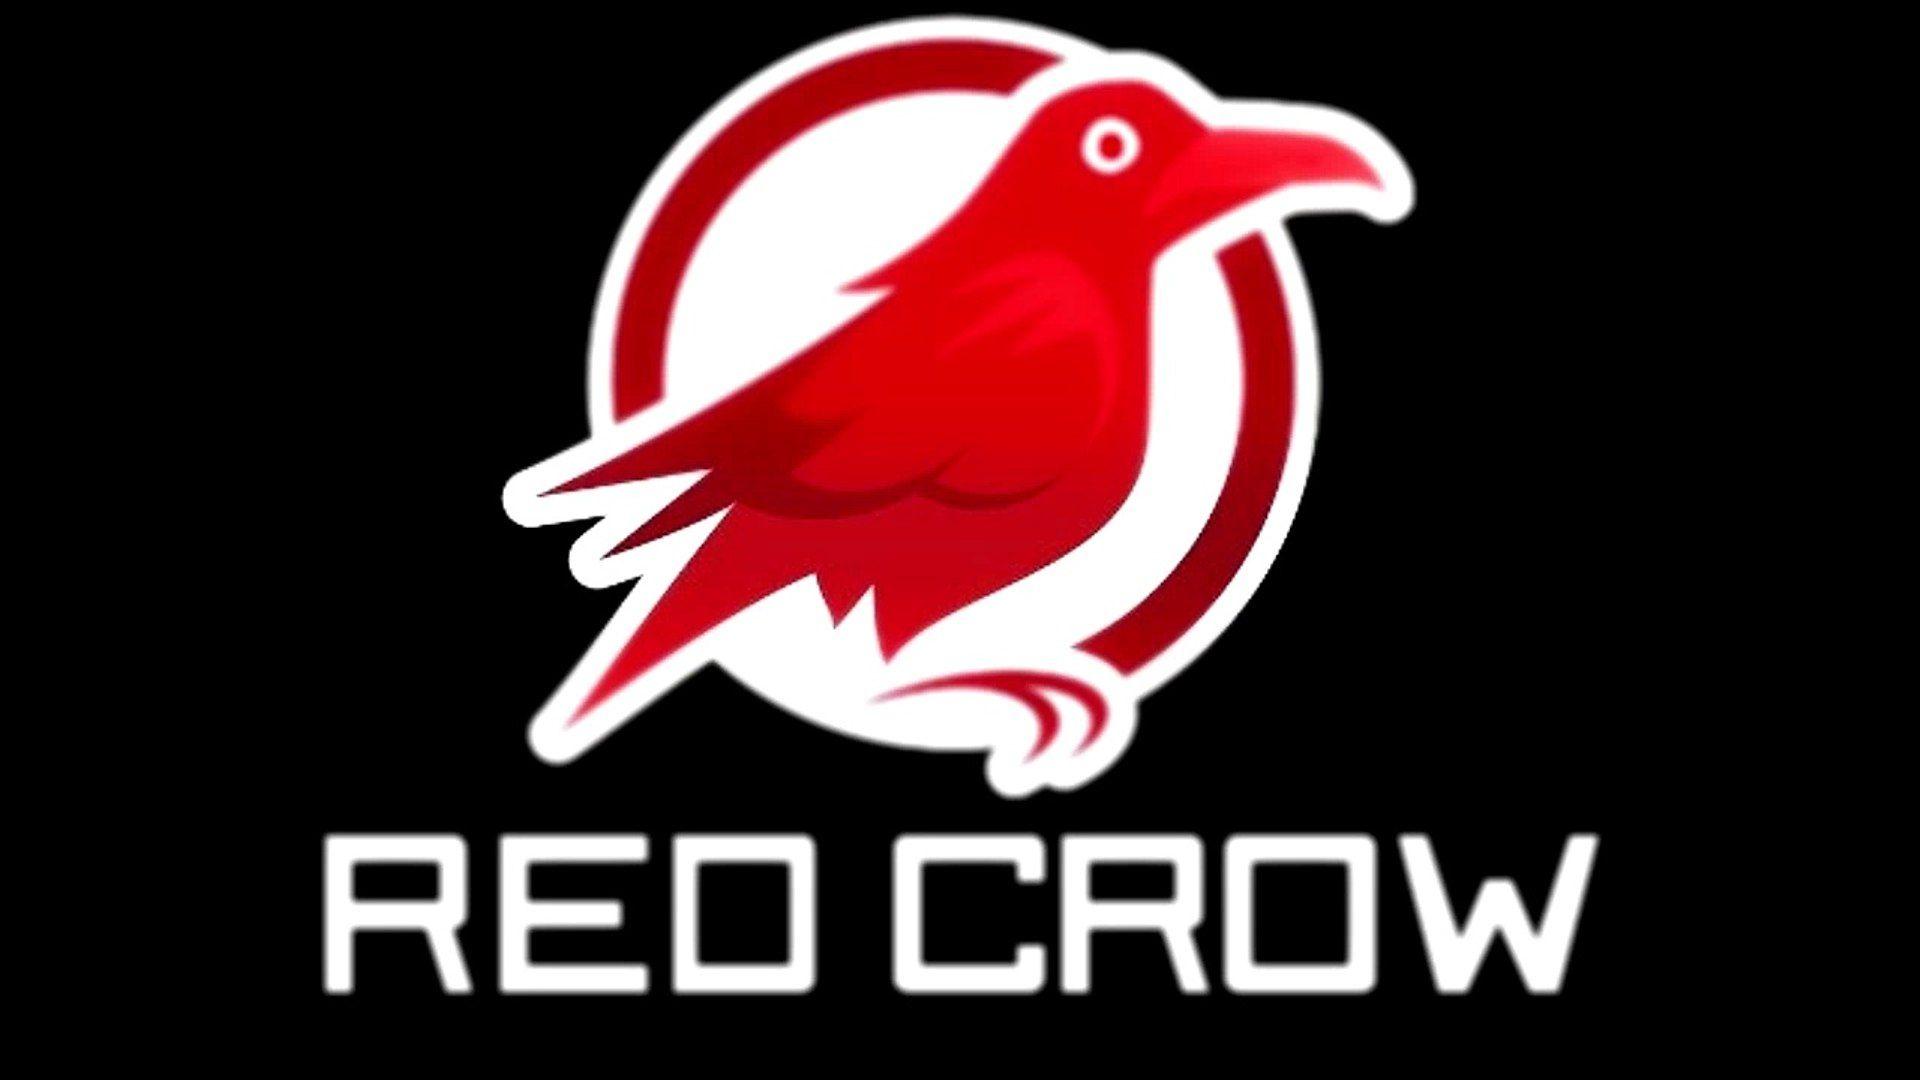 Red Crow Logo - RED CROW